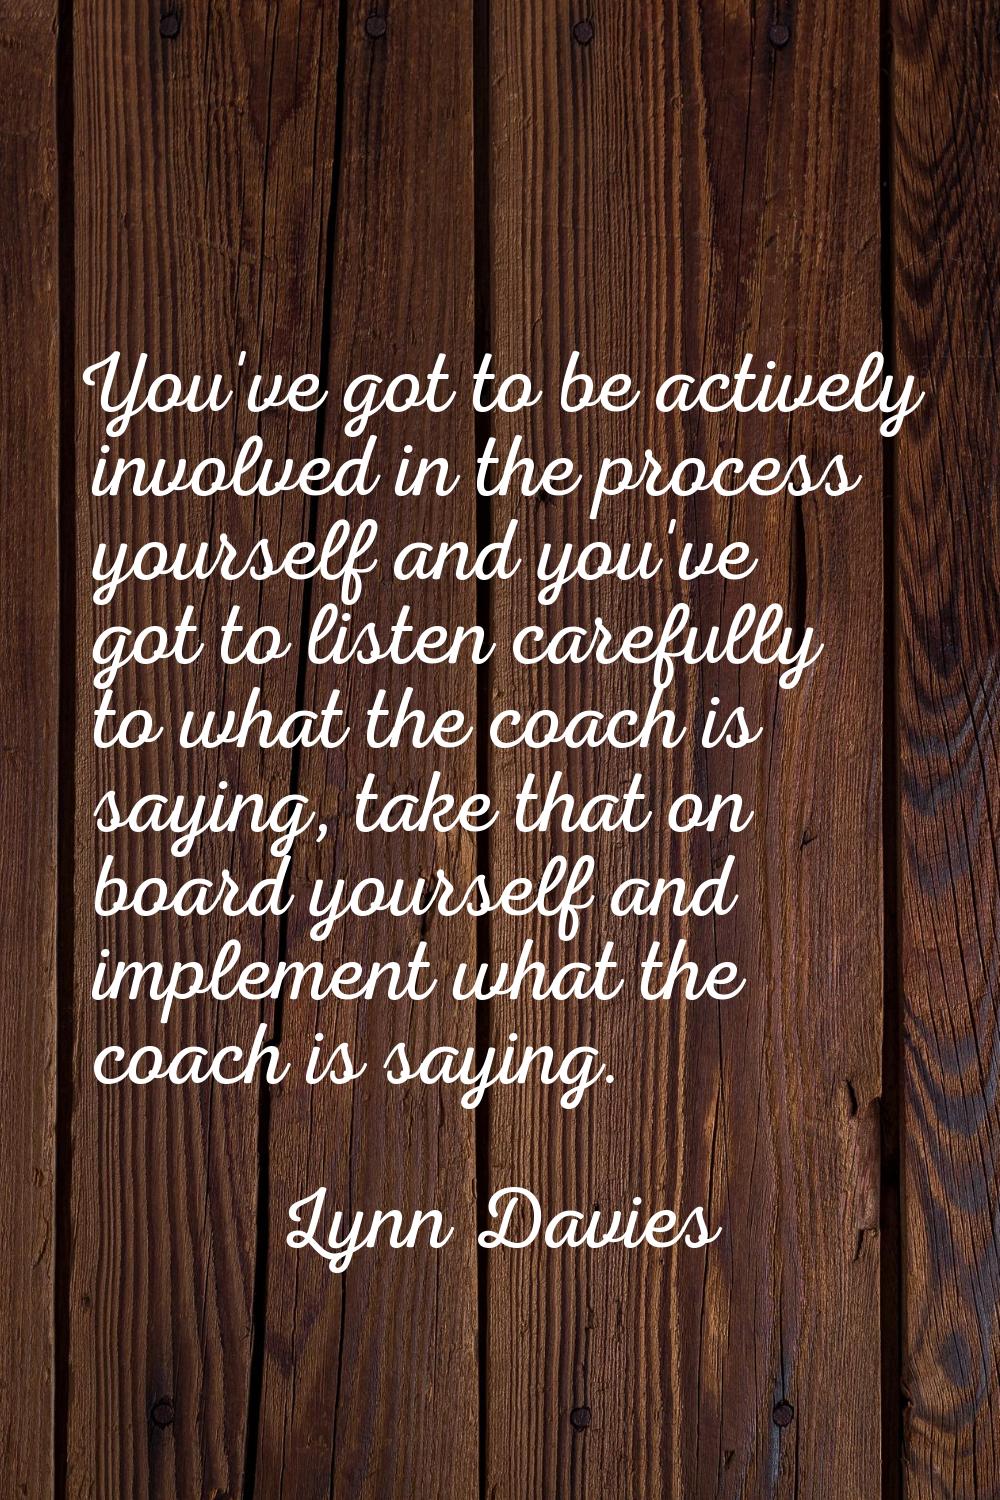 You've got to be actively involved in the process yourself and you've got to listen carefully to wh